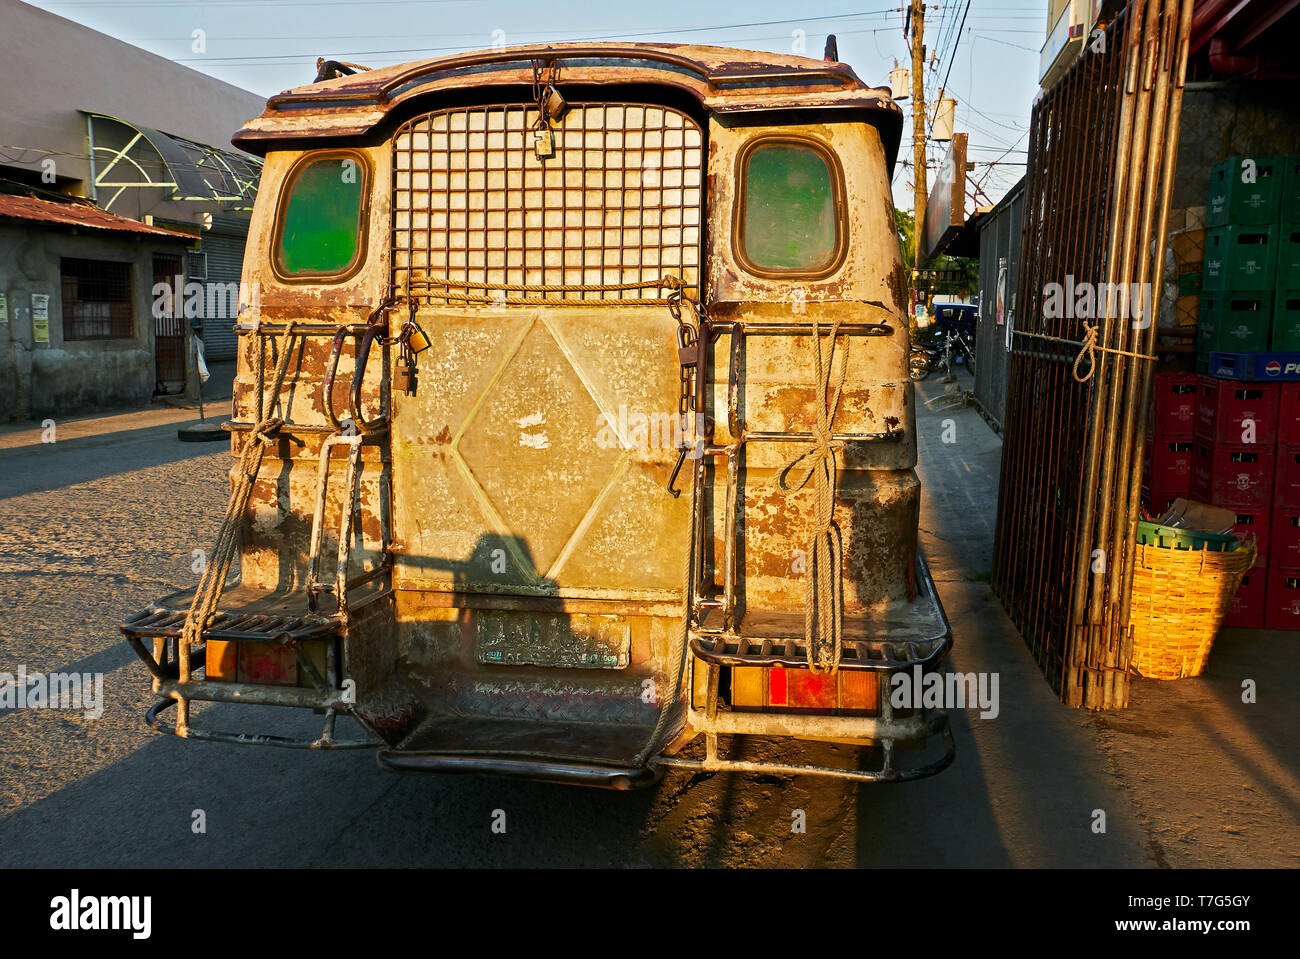 Rear of an old rusty jeepney type of delivery truck, with green windows several padlocks attached to it, parking in the streets of Iloilo, Philippines Stock Photo